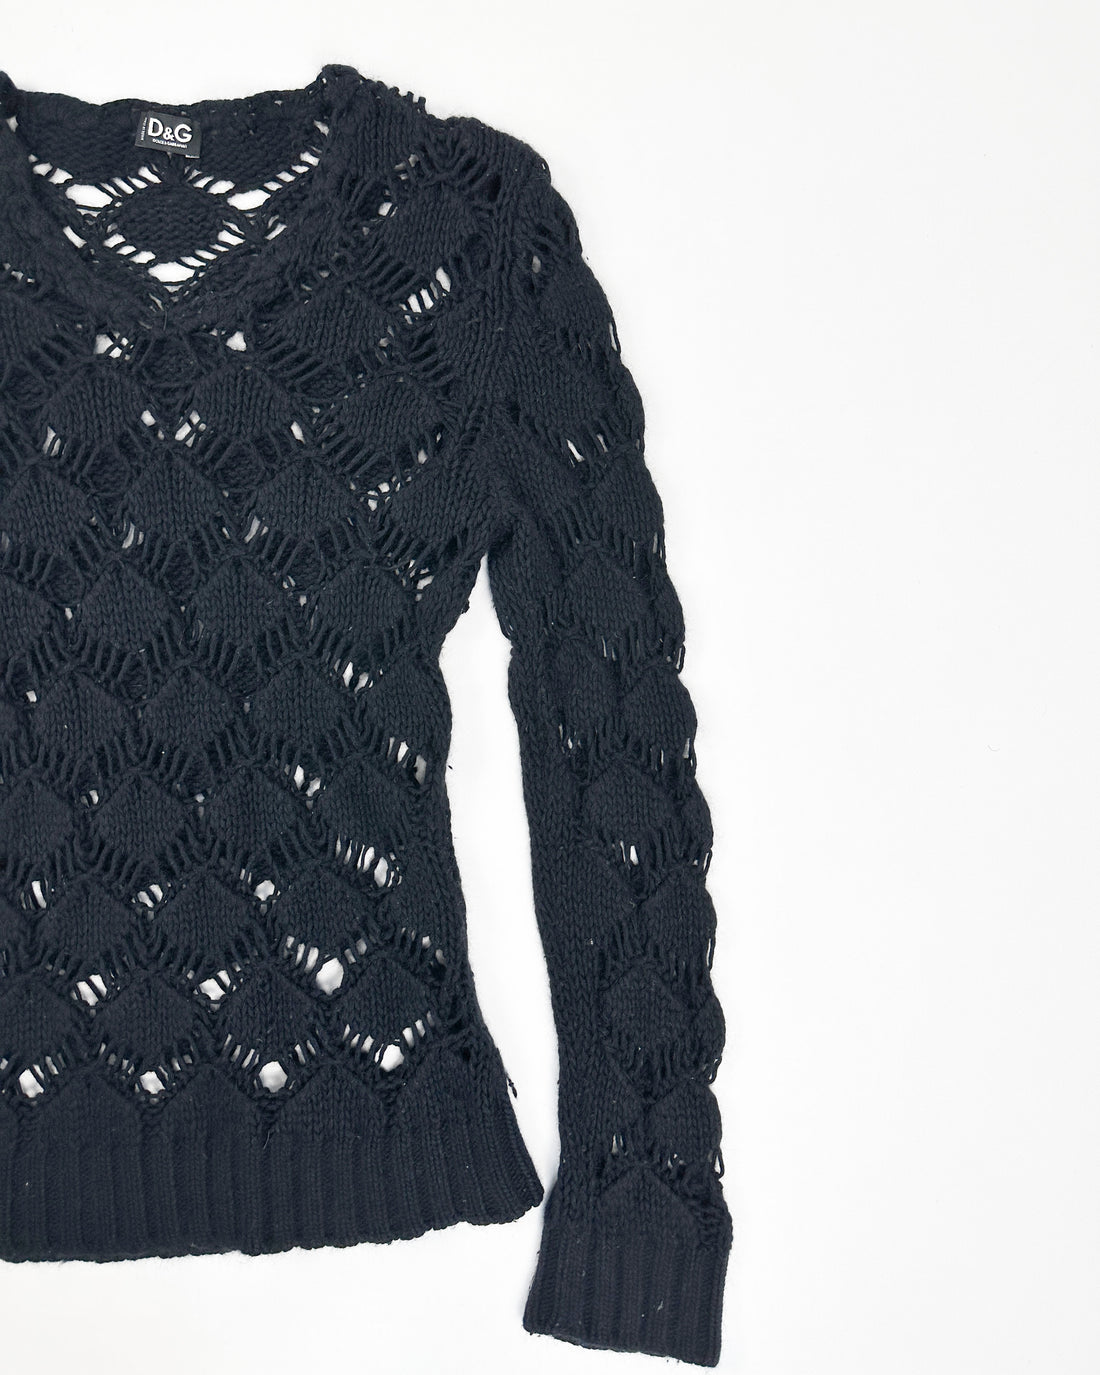 Dolce & Gabbana Black Wool Perforated Knit 2000's